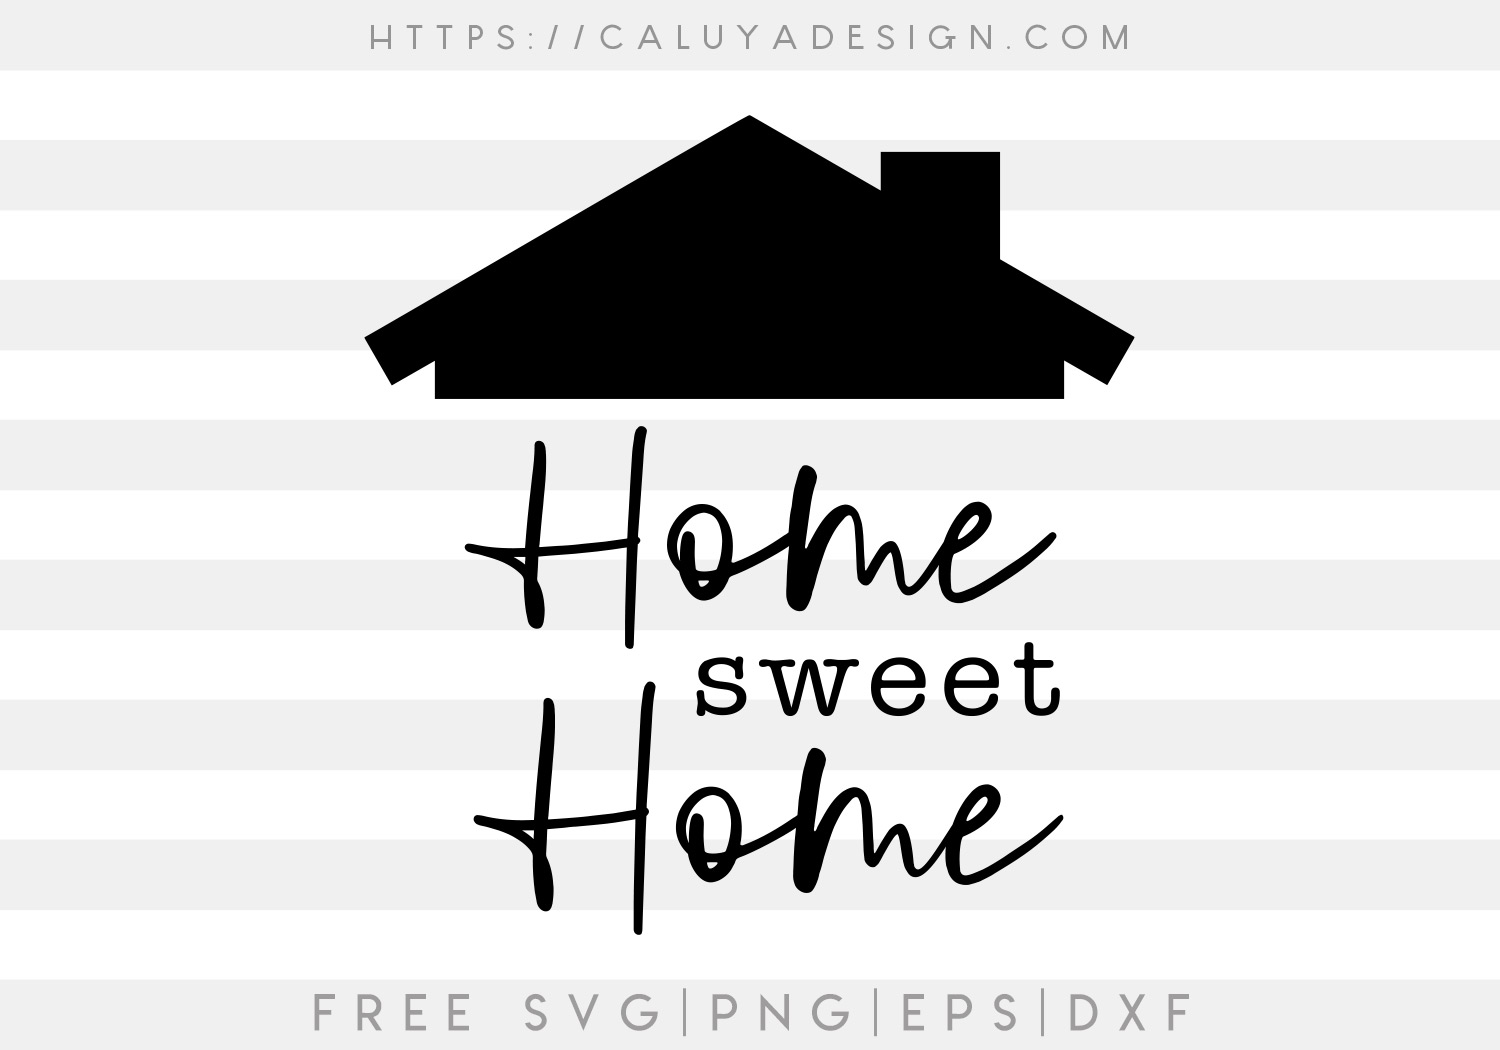 15 FREE Sign Making SVG & PNG Files You Need to Download Now